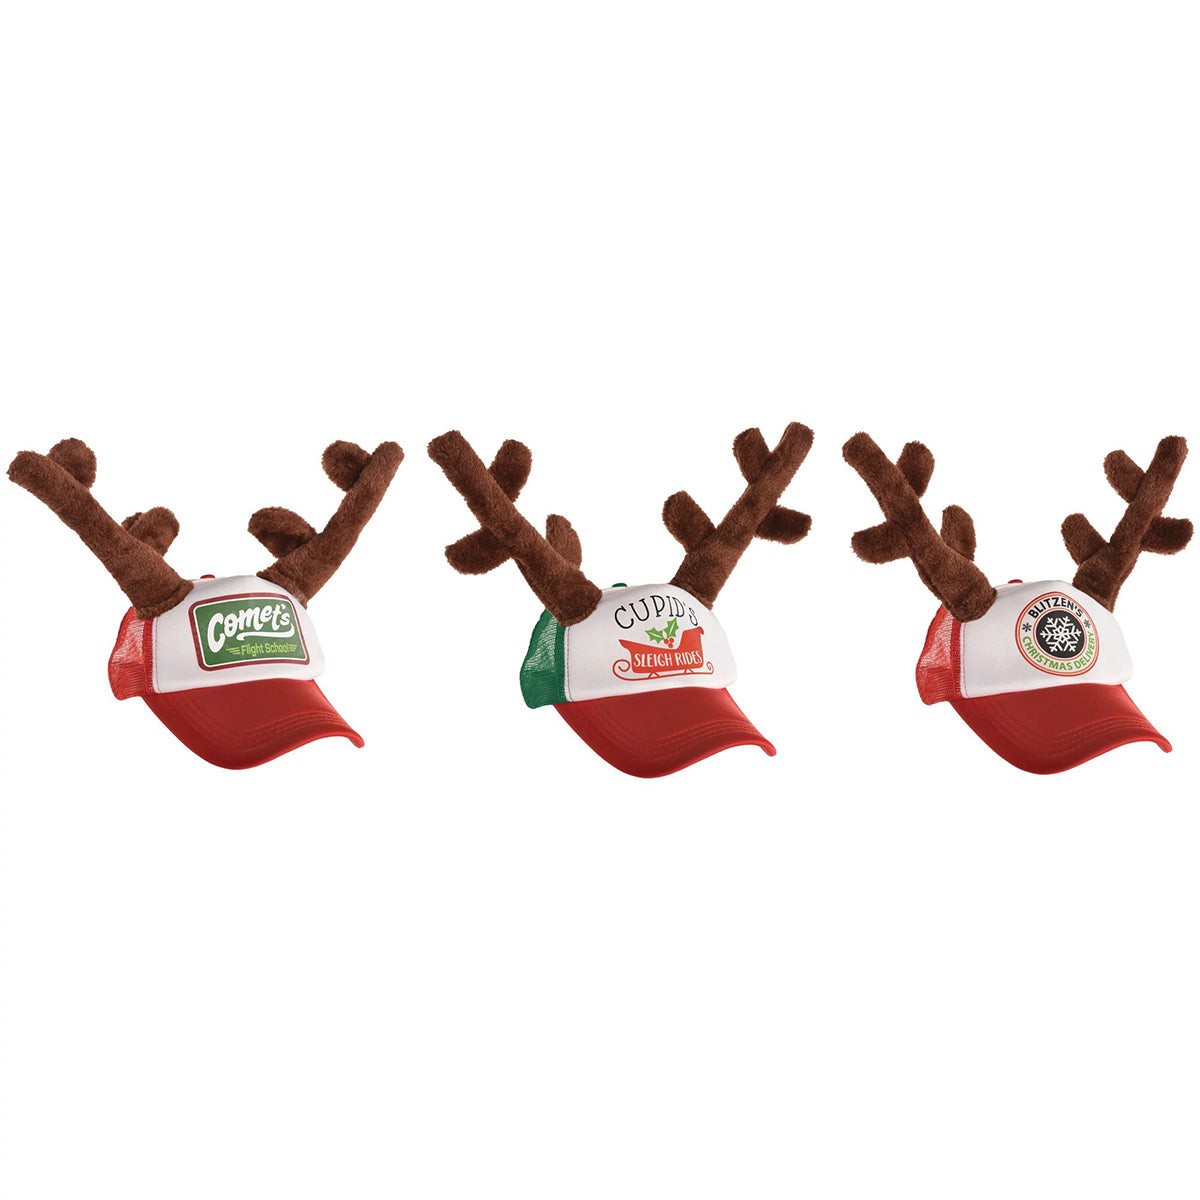 BEISTLE COMPANY Christmas Trucker Hat with Reindeer Antlers, Assortment, 1 Count